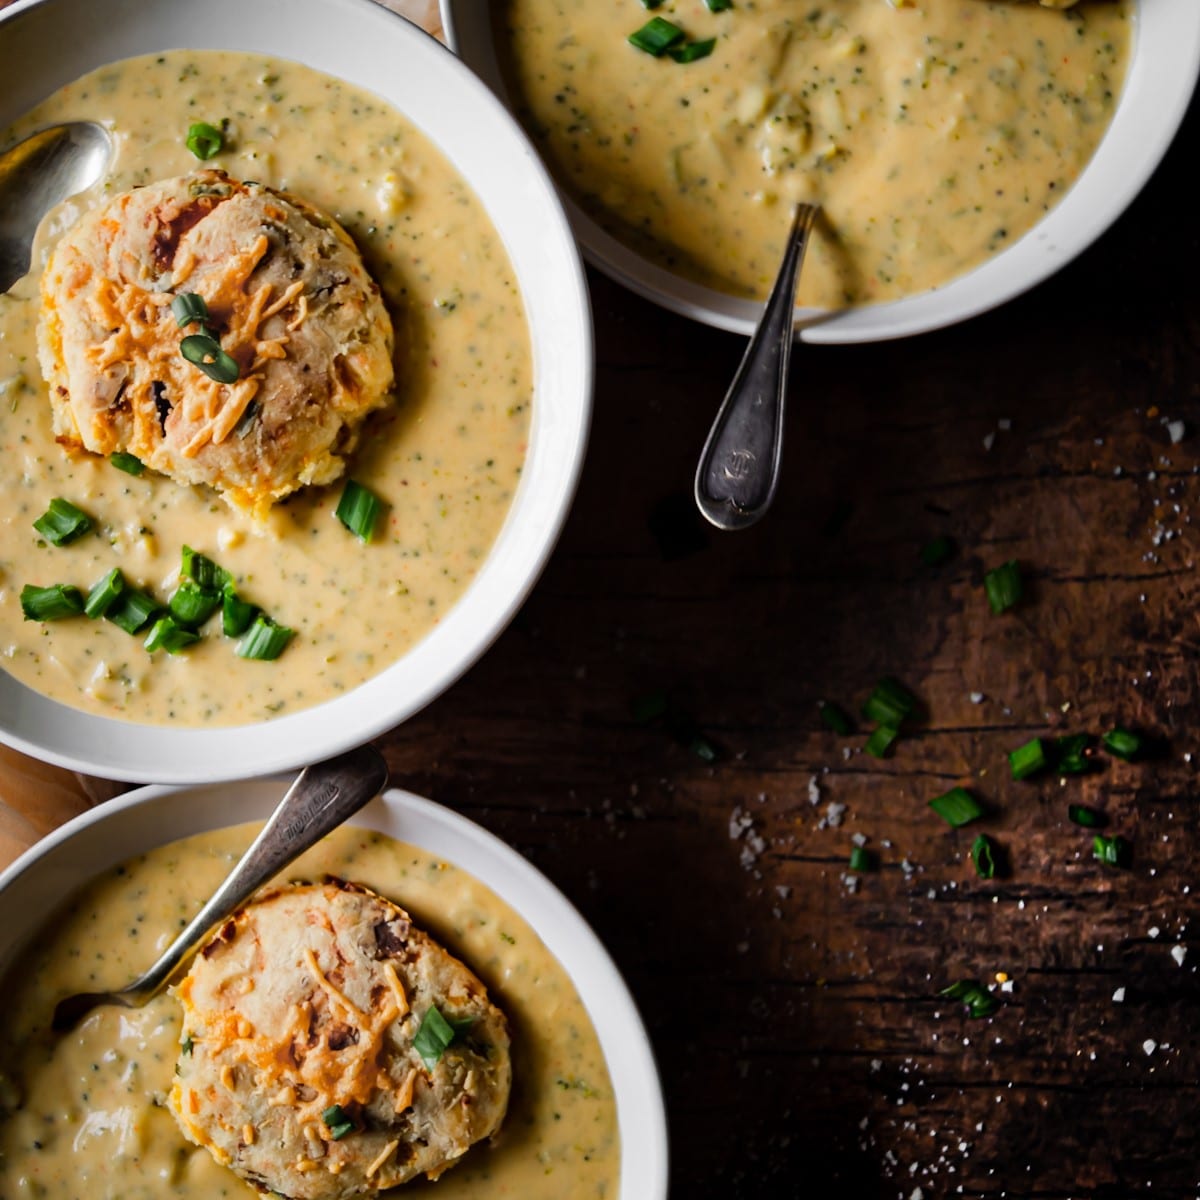 Creamy broccoli cheddar cheese soup in bowls topped with a biscuit